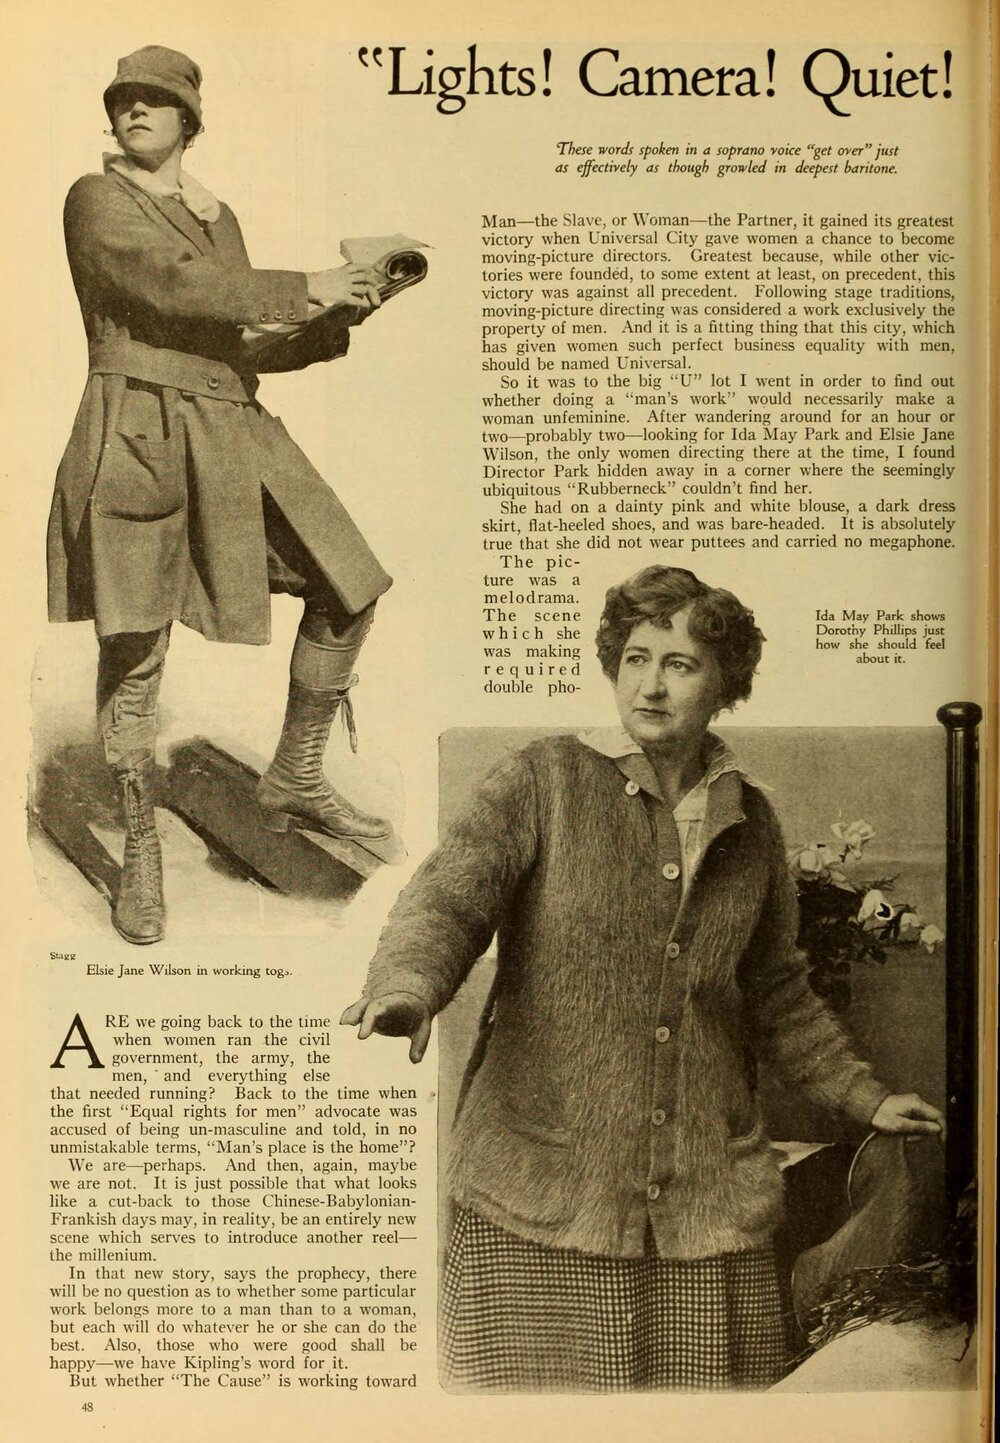  Elsie Jane Wilson interview in Photoplay (1917), courtesy of the Media History Digital Library and The Museum of Modern Art Library, New York. 